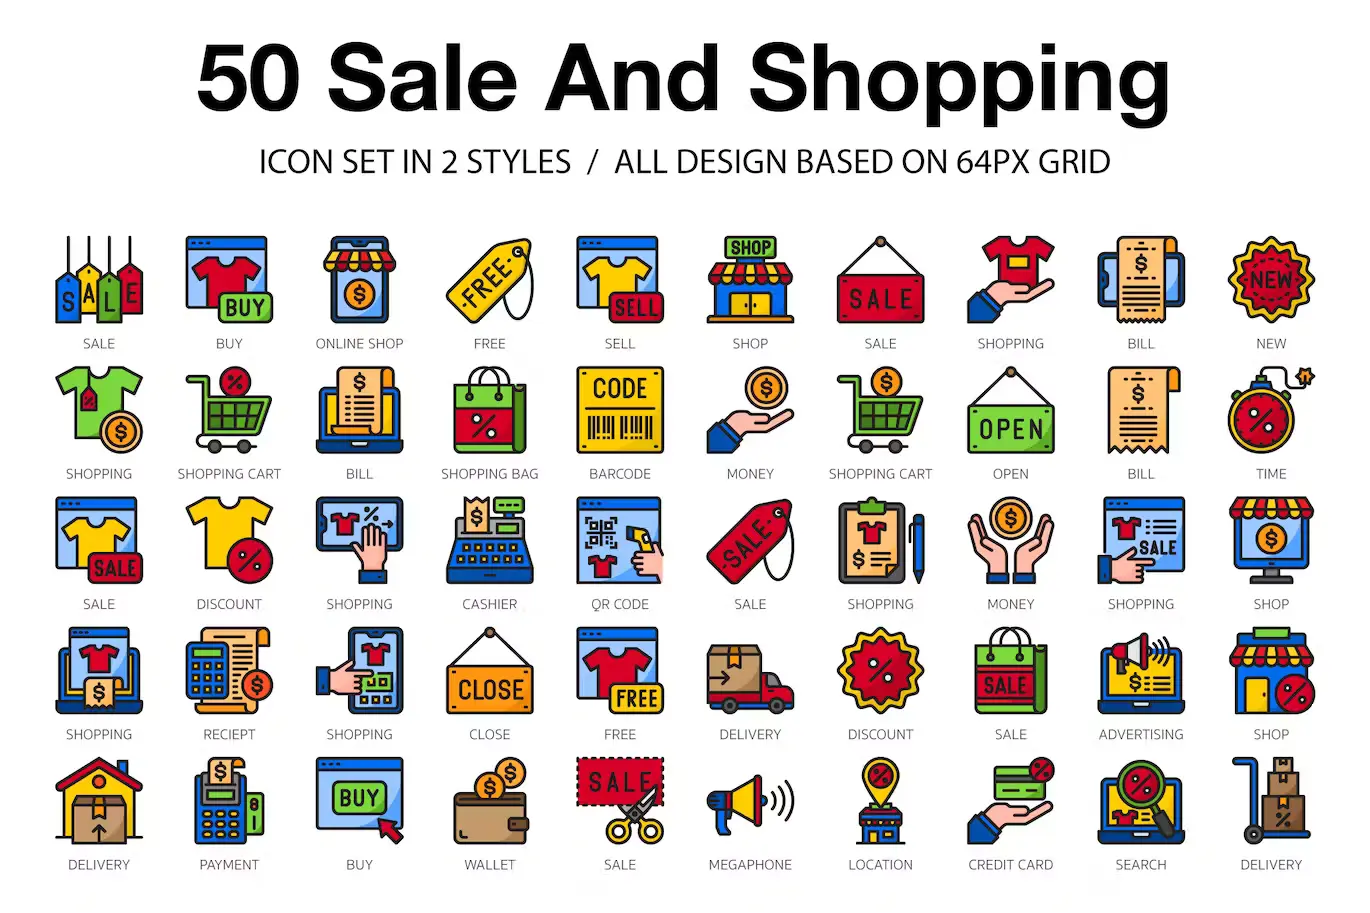 50 Sale And Shopping - Outline and Colorline style